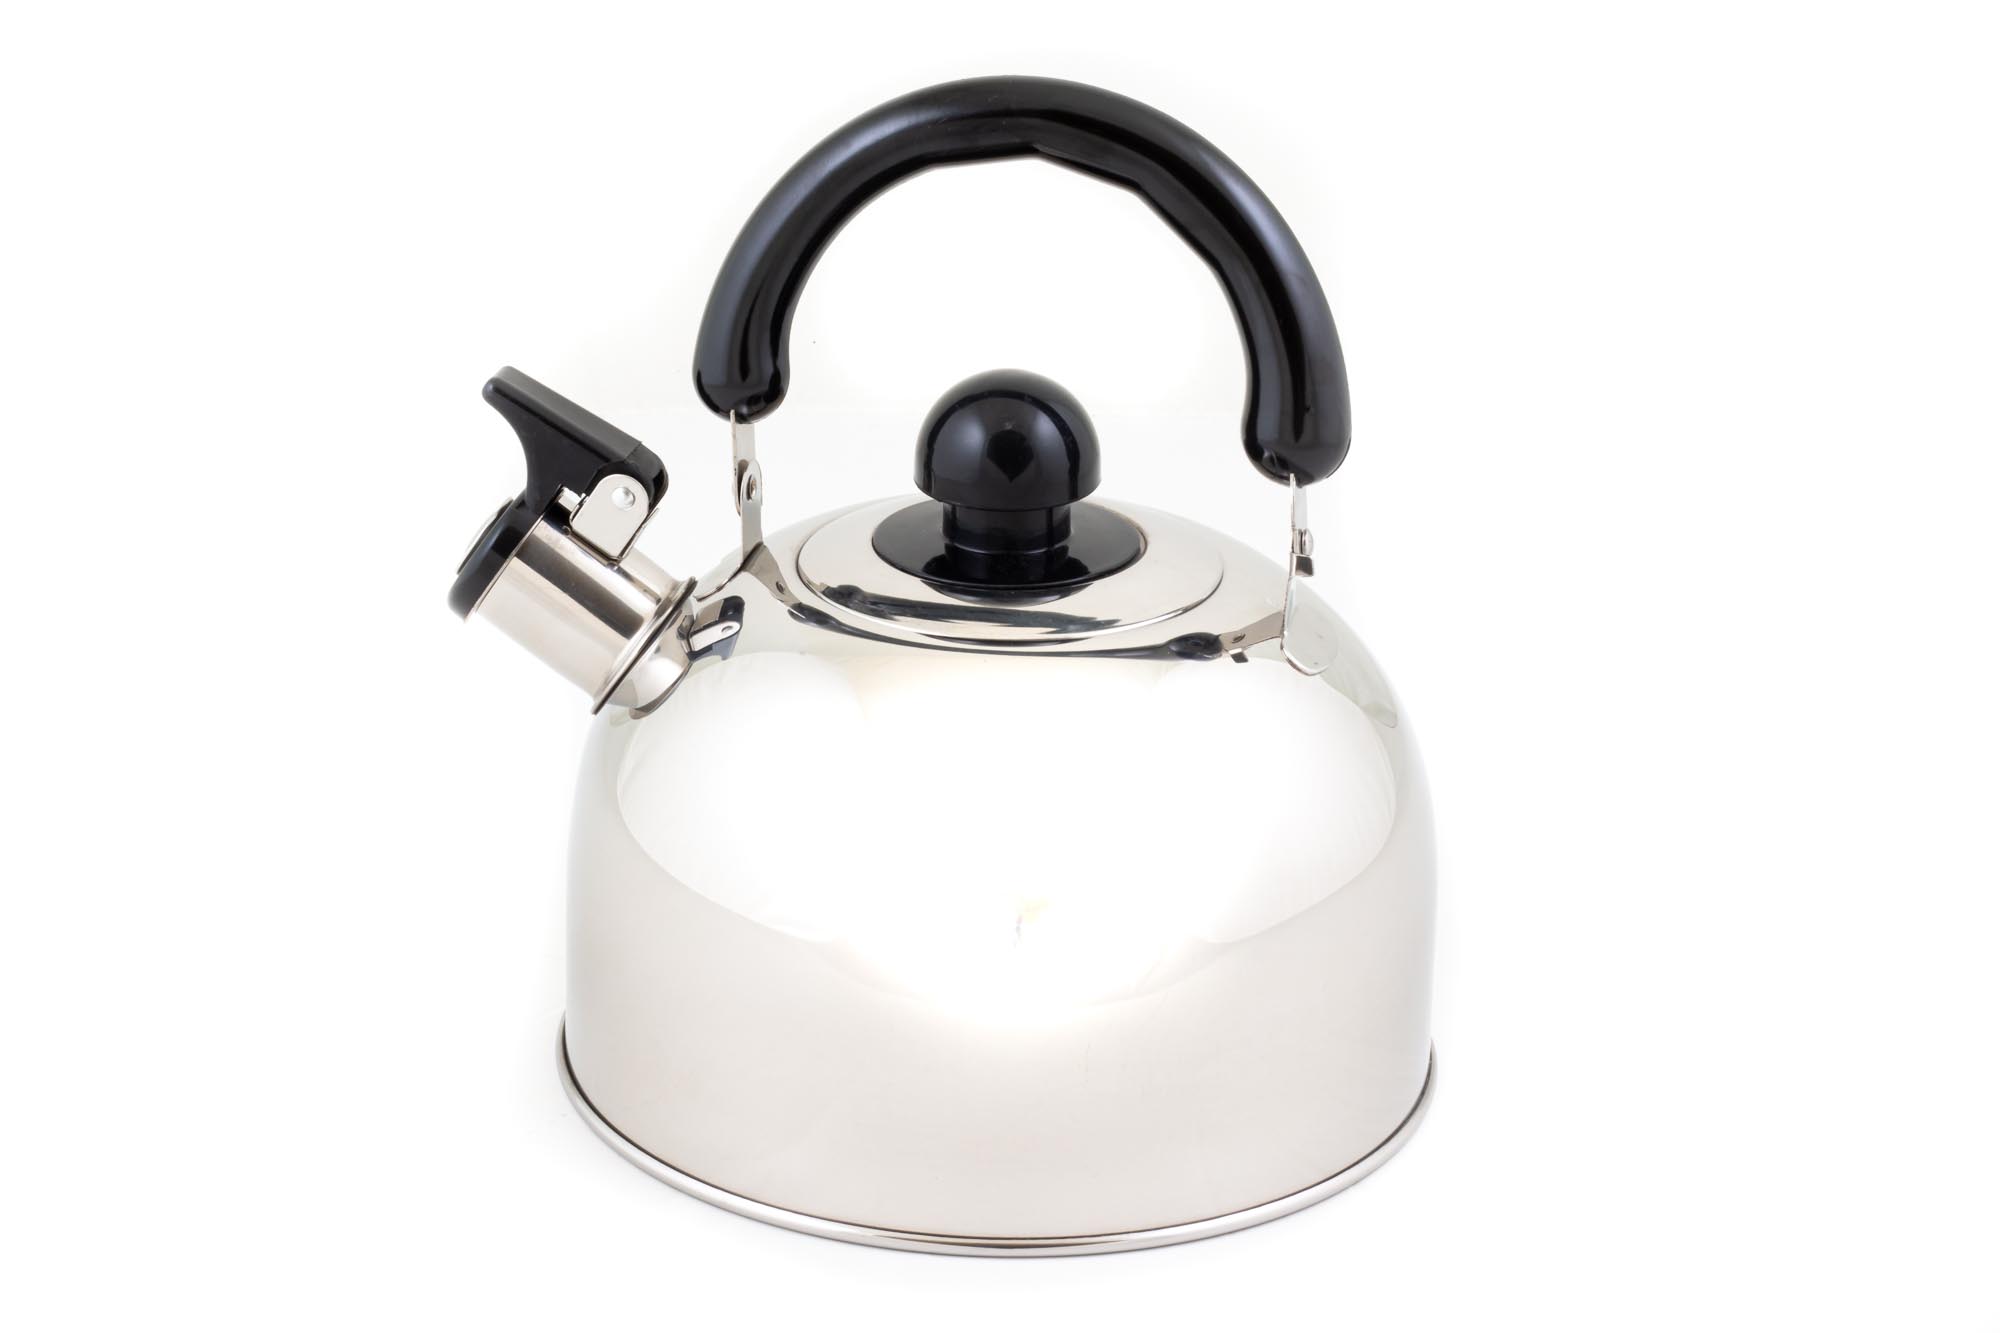 Flute kettle 1.8 liters with signal whistle